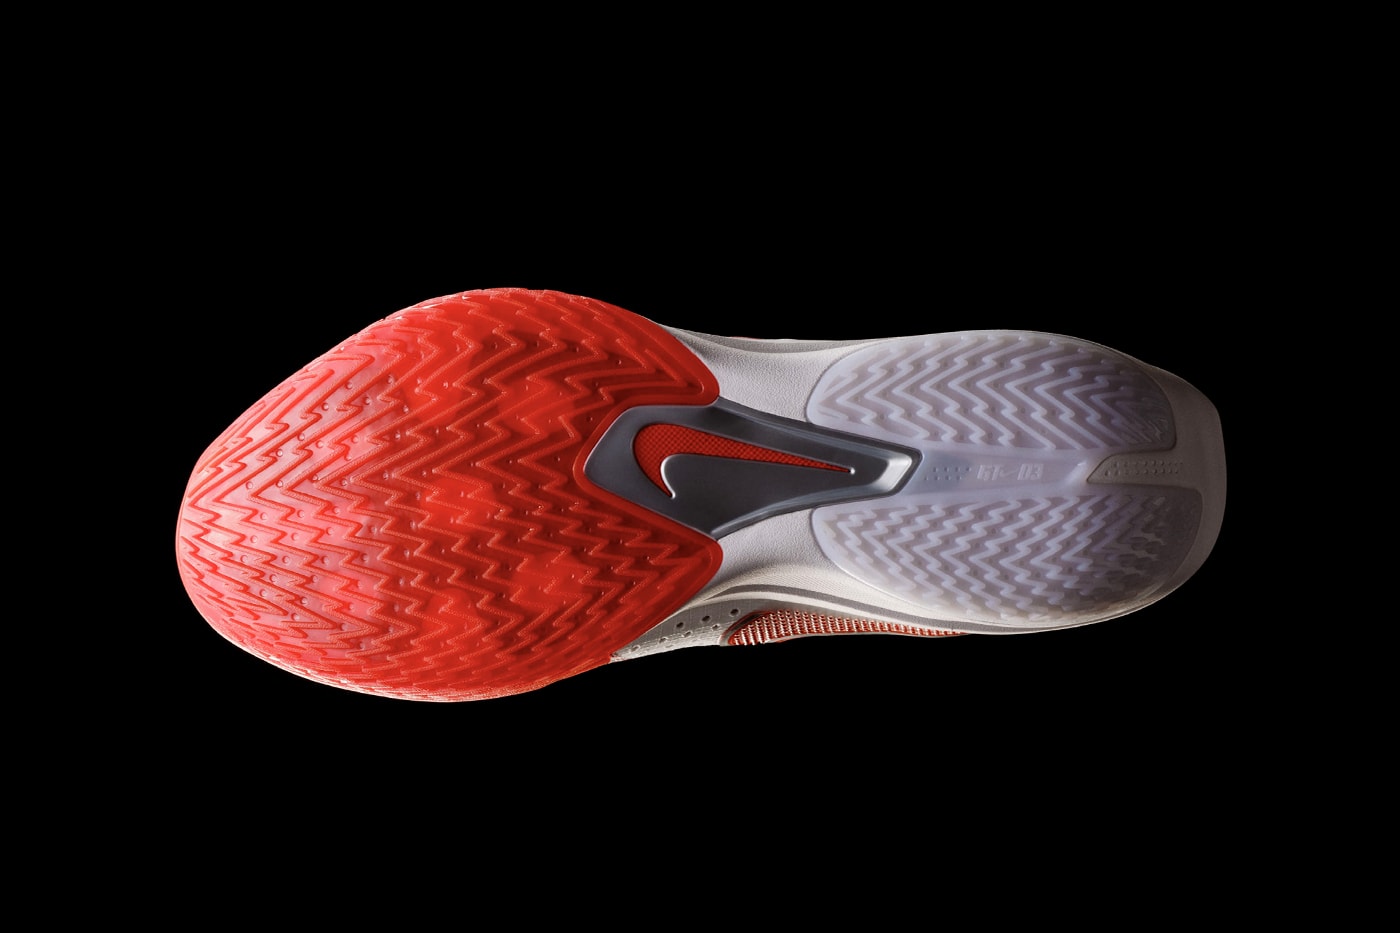 Nike Officially Launches First Look at the GT Cut 3 nike basketball greater than series zoomx foam series cut academy